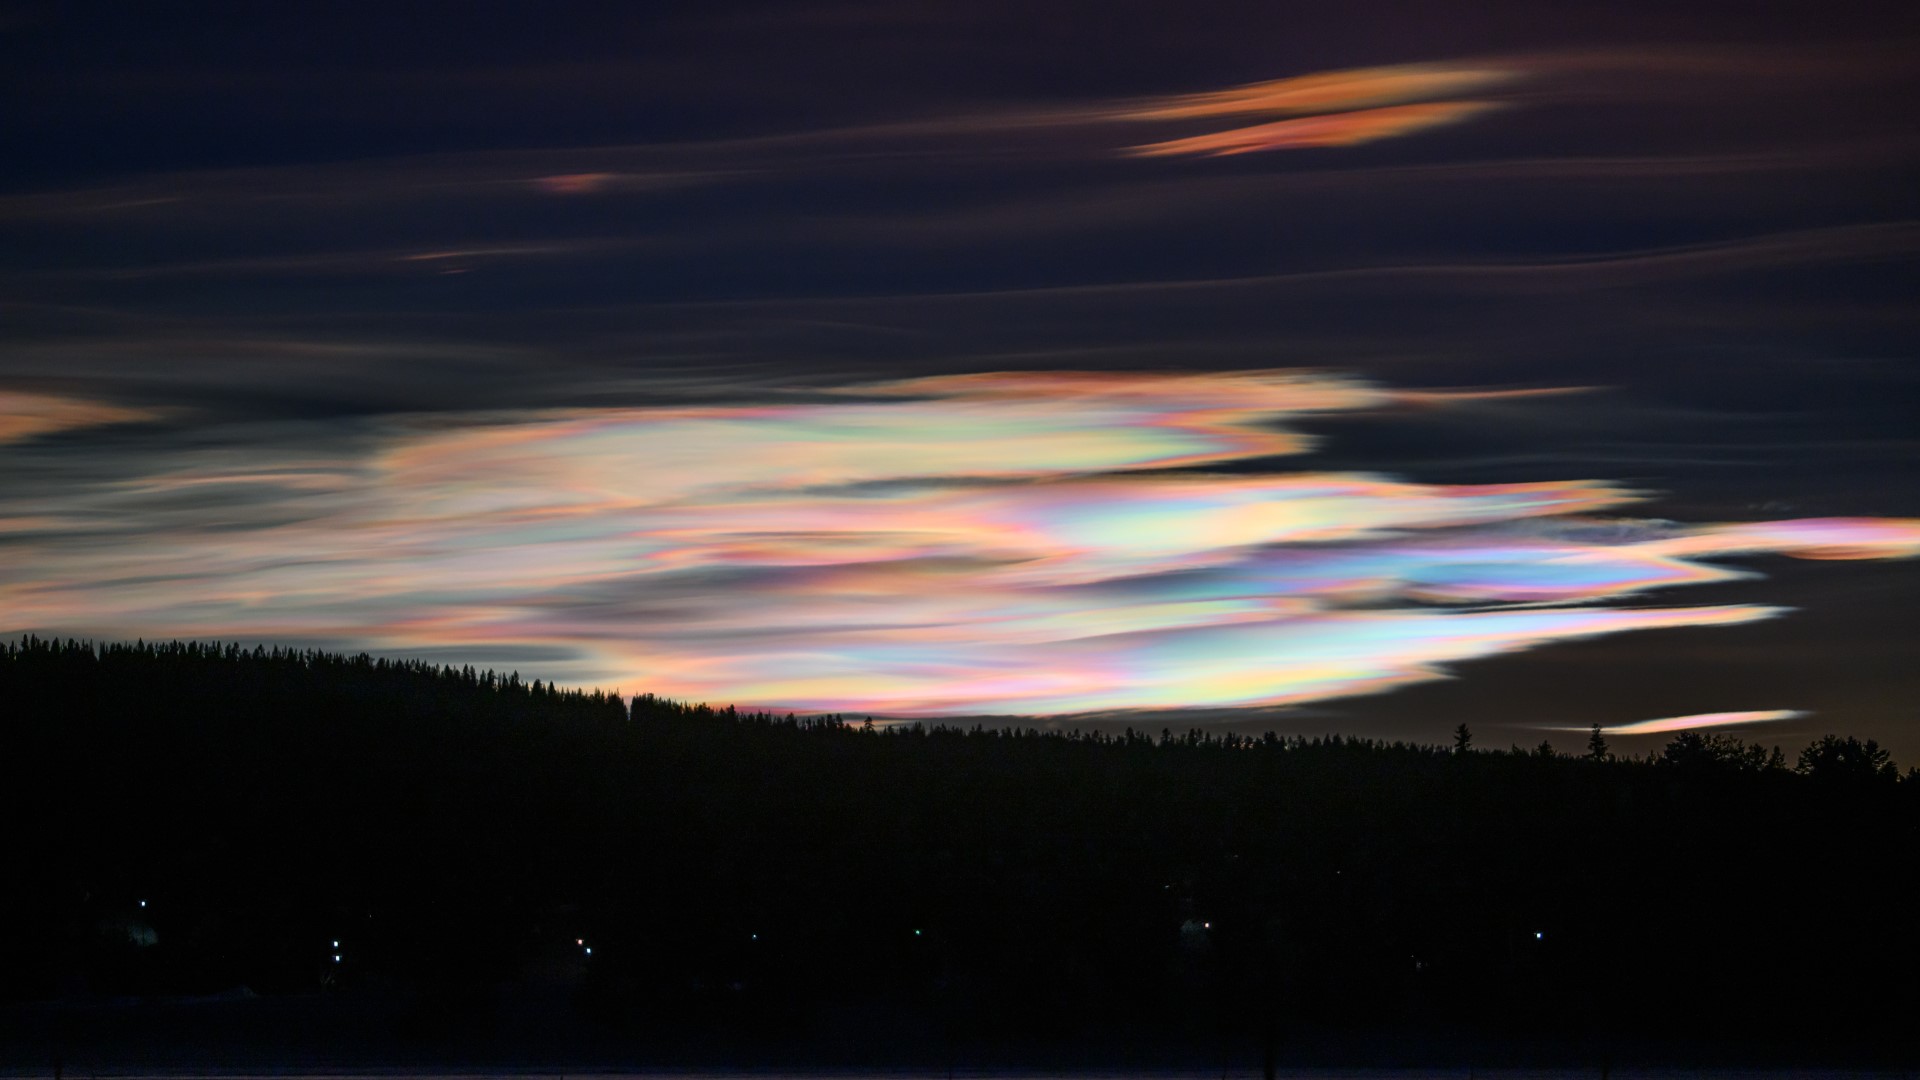 Spectacular ‘rainbow clouds’ light up northern skies in a rare skywatching treat (photos) Space